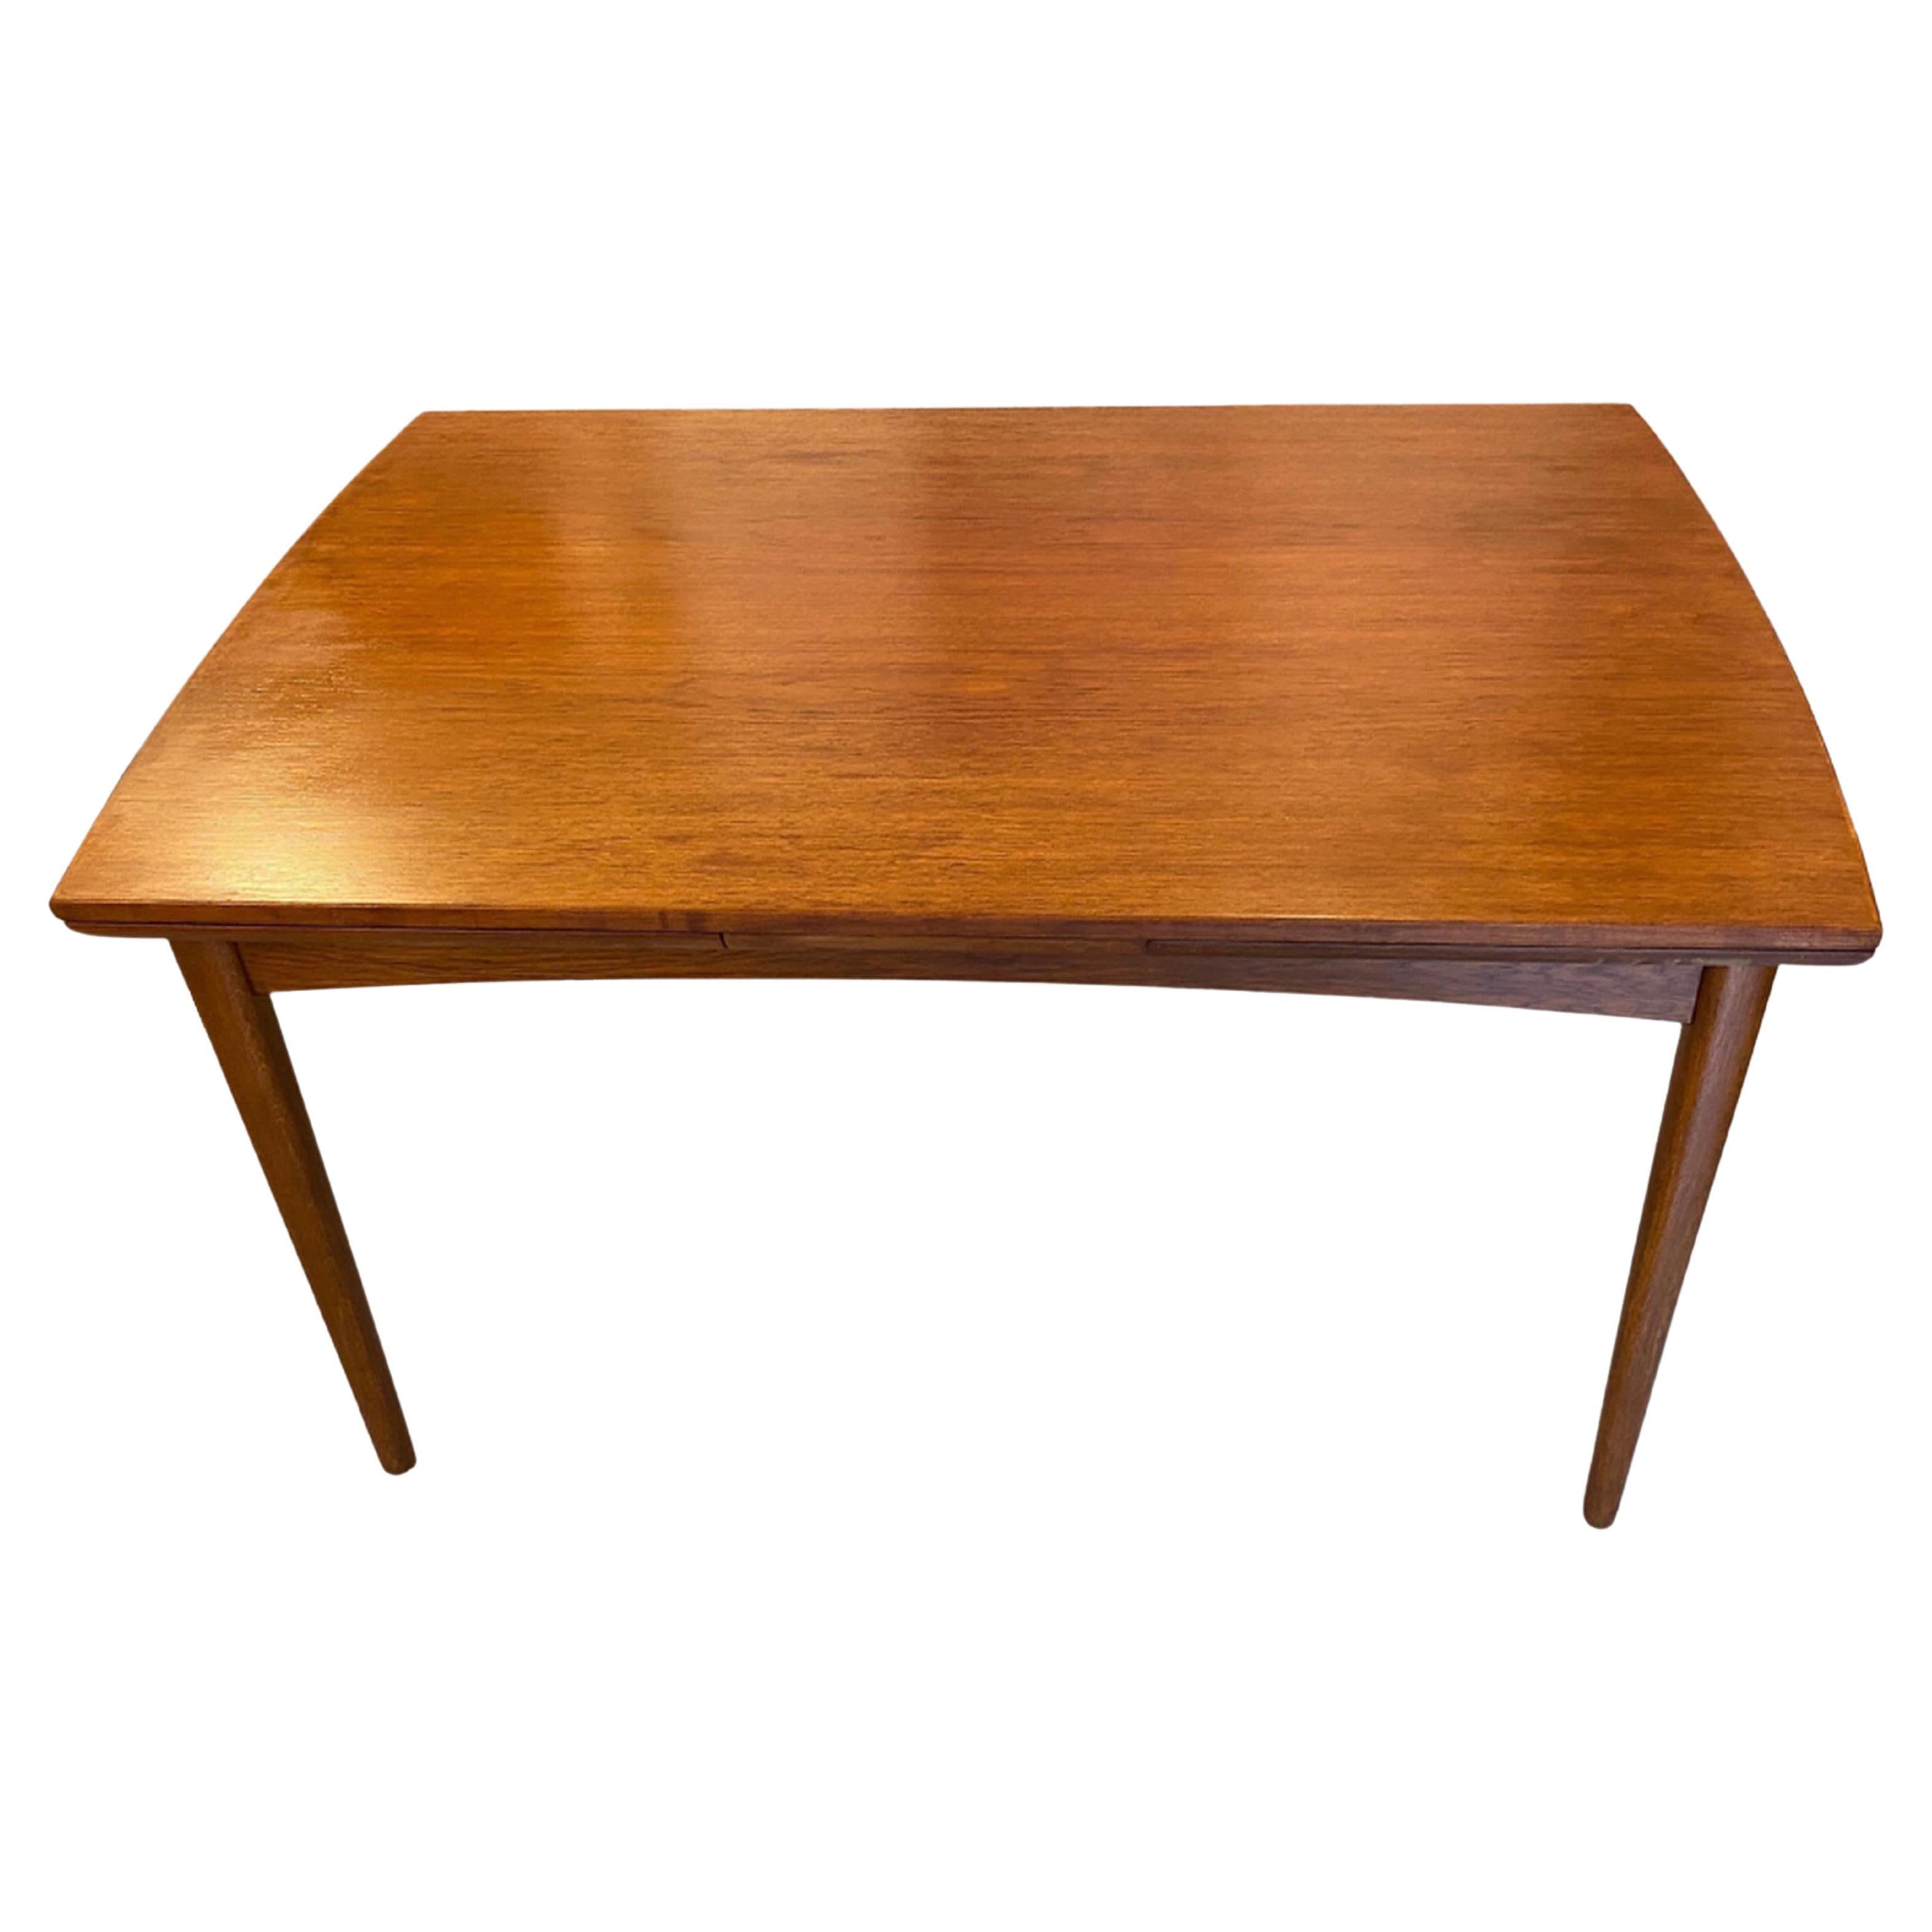 Classic Danish Mid-Century Dining Table in Teak with Extensions